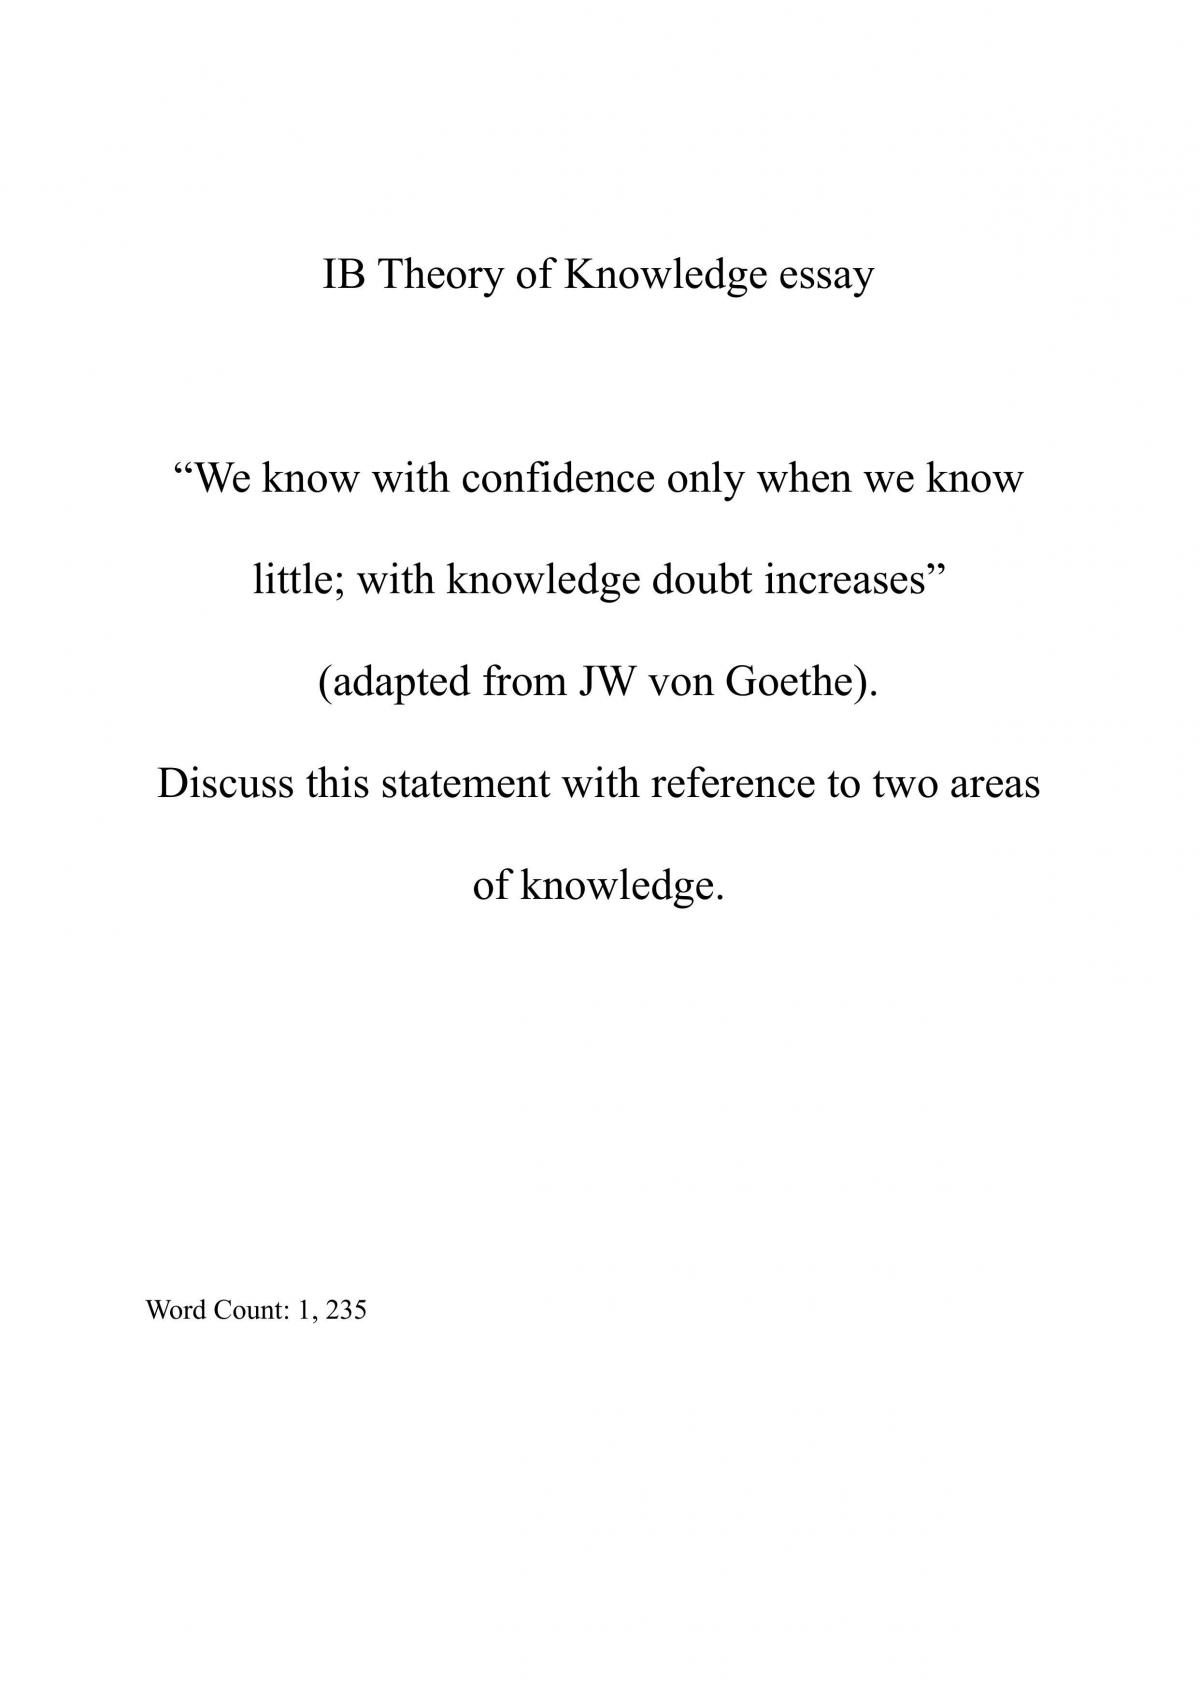 ib theory of knowledge essay questions